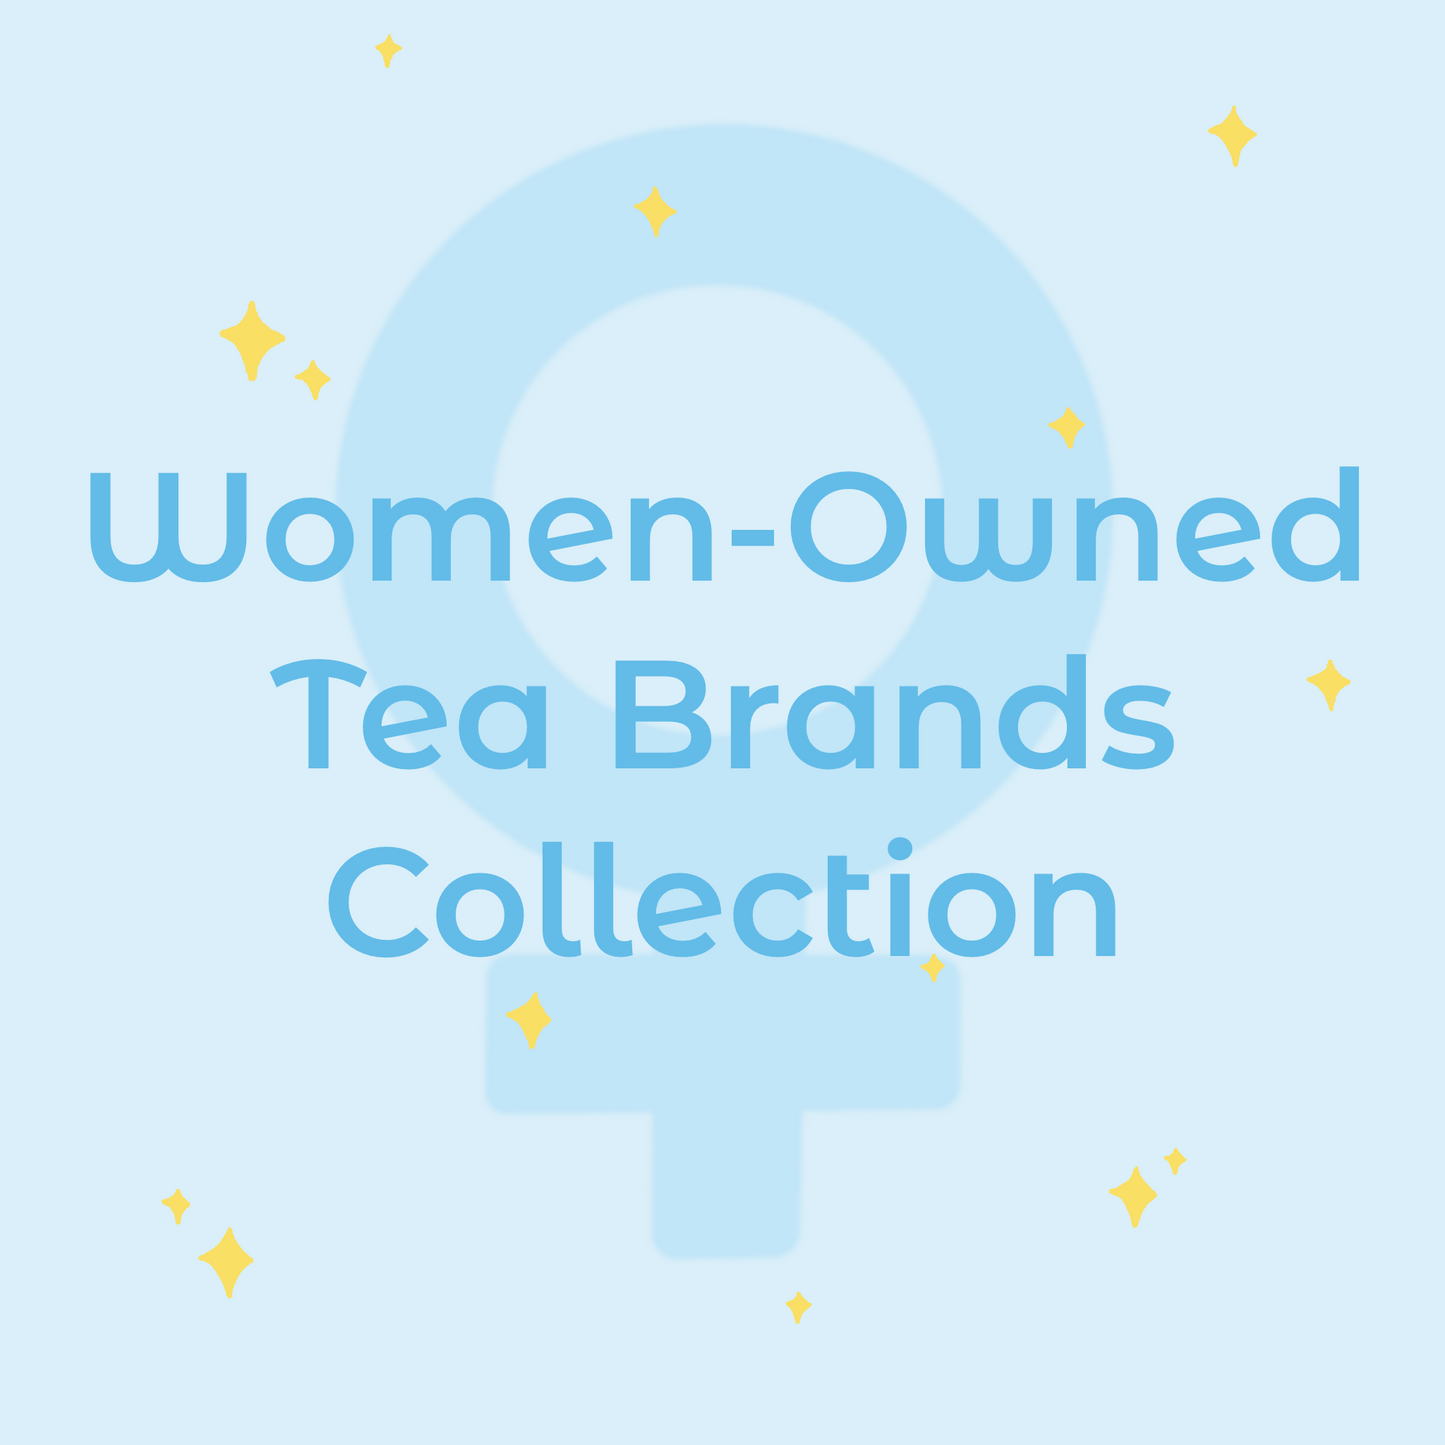 Women-Owned Tea Brands Collection light blue illustration with yellow sparkles